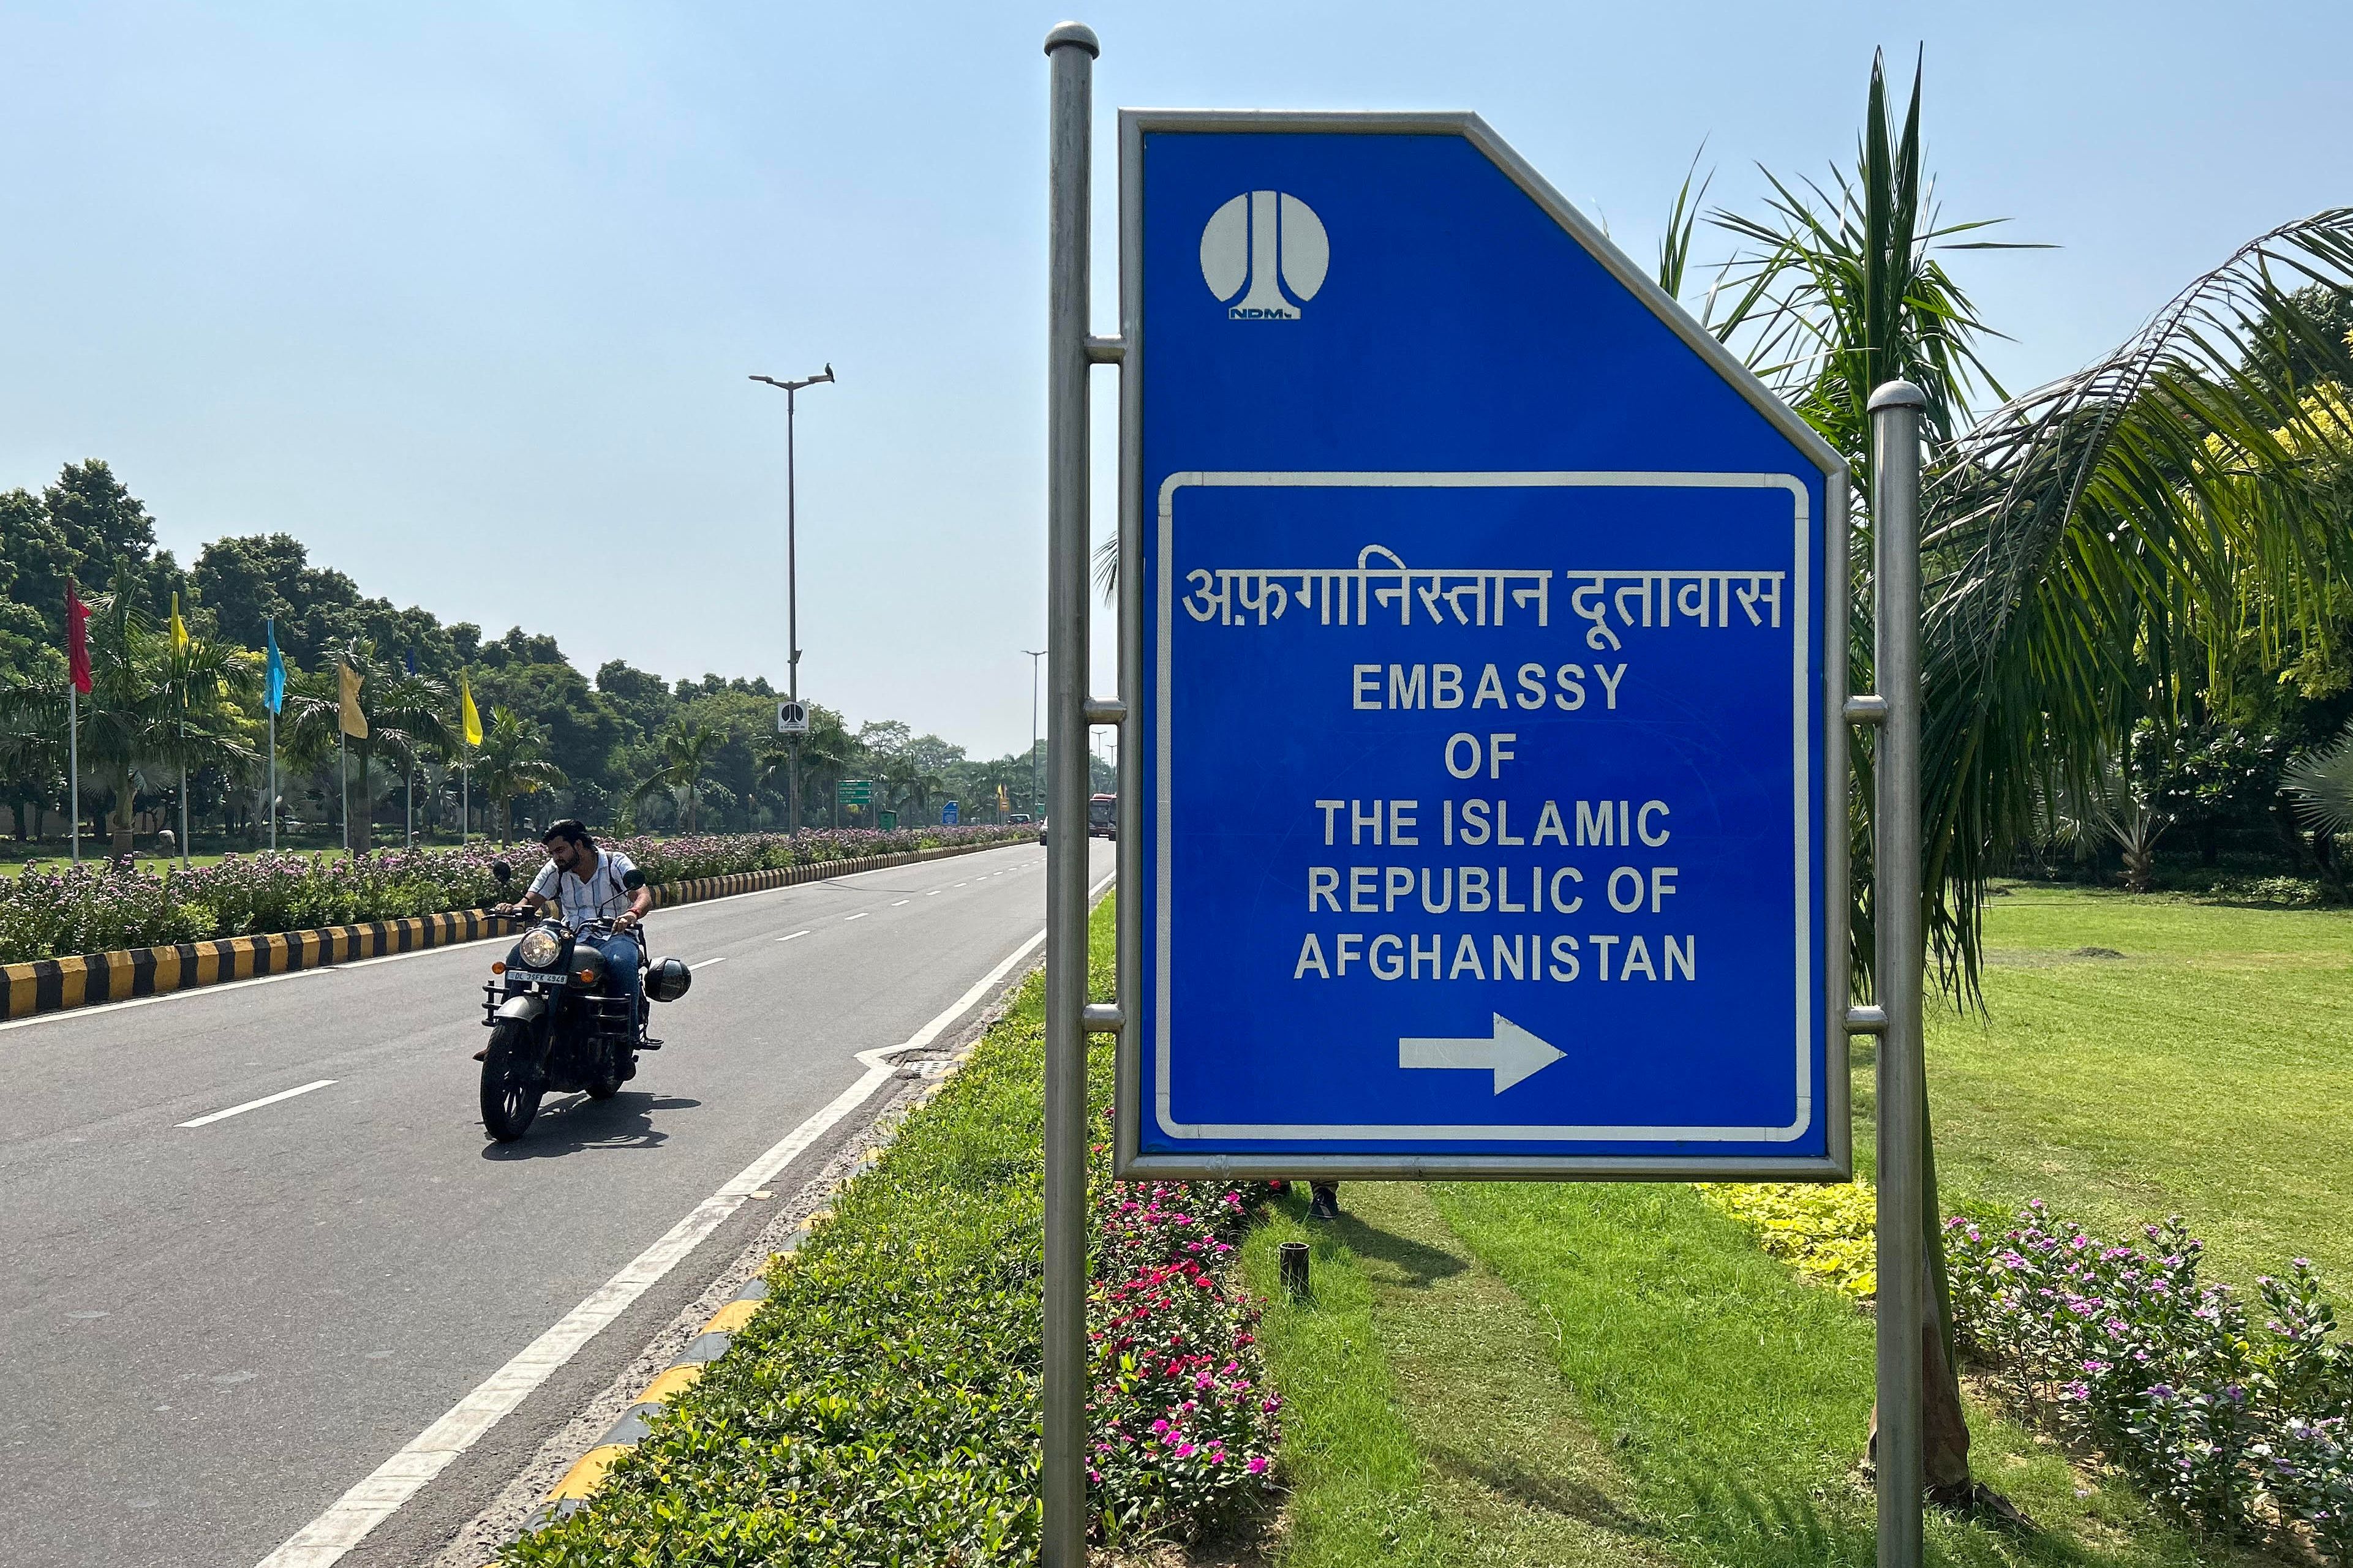 A motorist rides past a sign board for the embassy of the Islamic Republic of Afghanistan in New Delhi